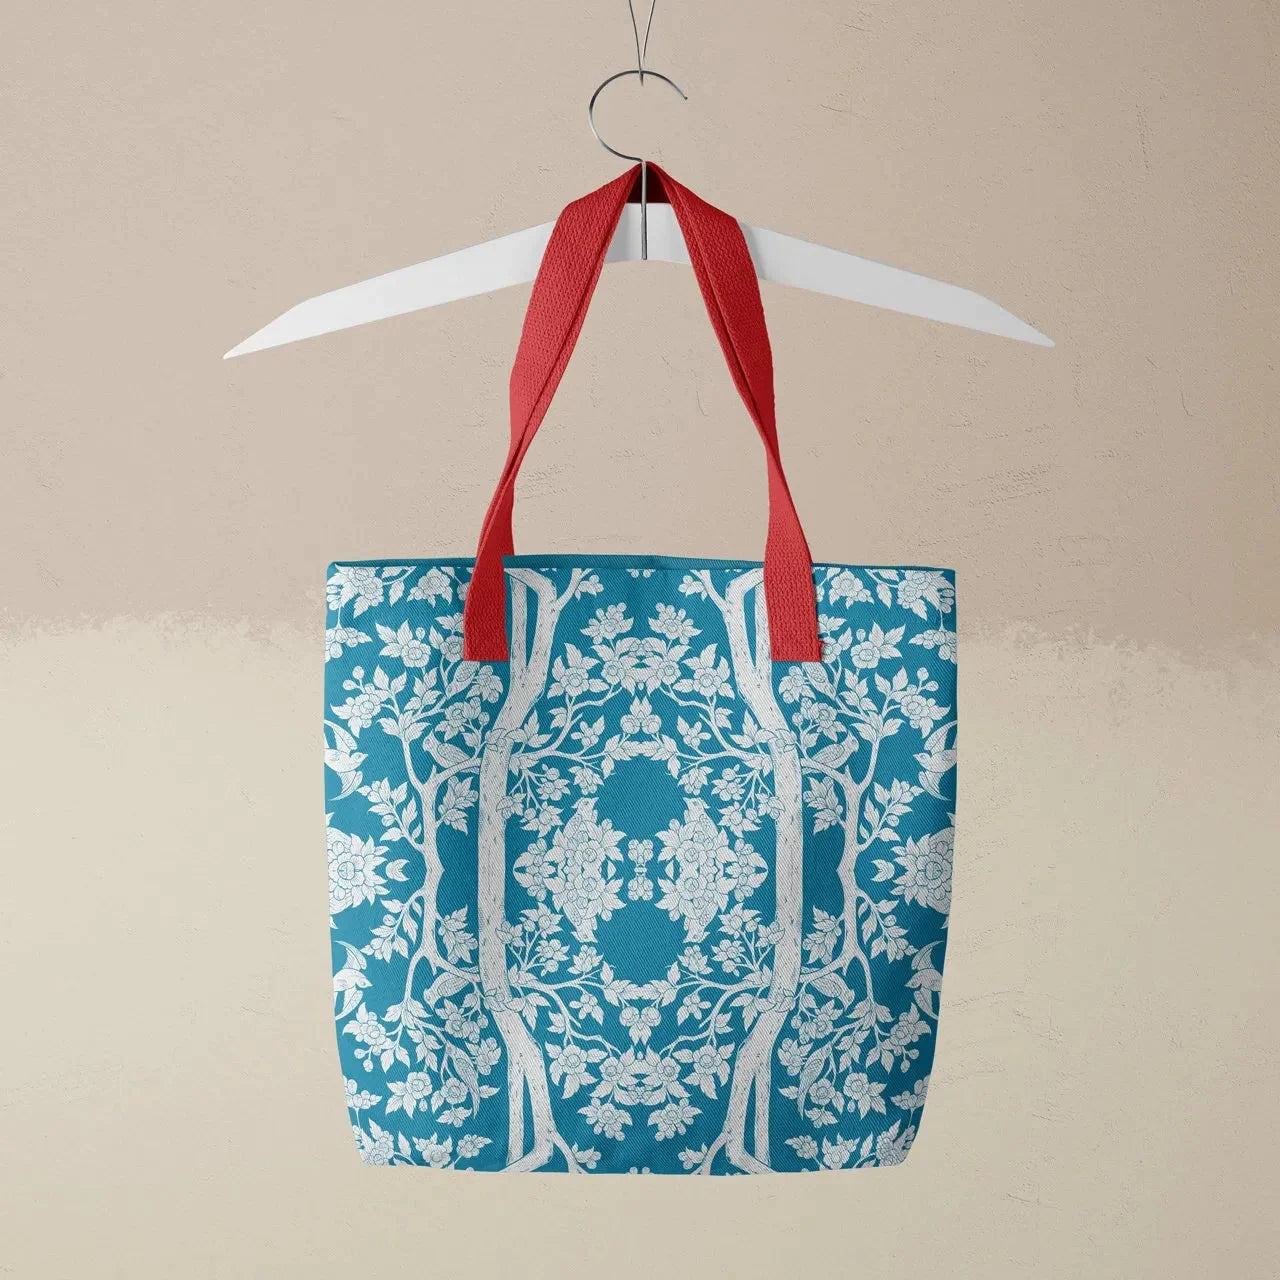 Aviary Tote - Bluebird - Heavy Duty Reusable Grocery Bag - Red Handles - Shopping Totes - Aesthetic Art